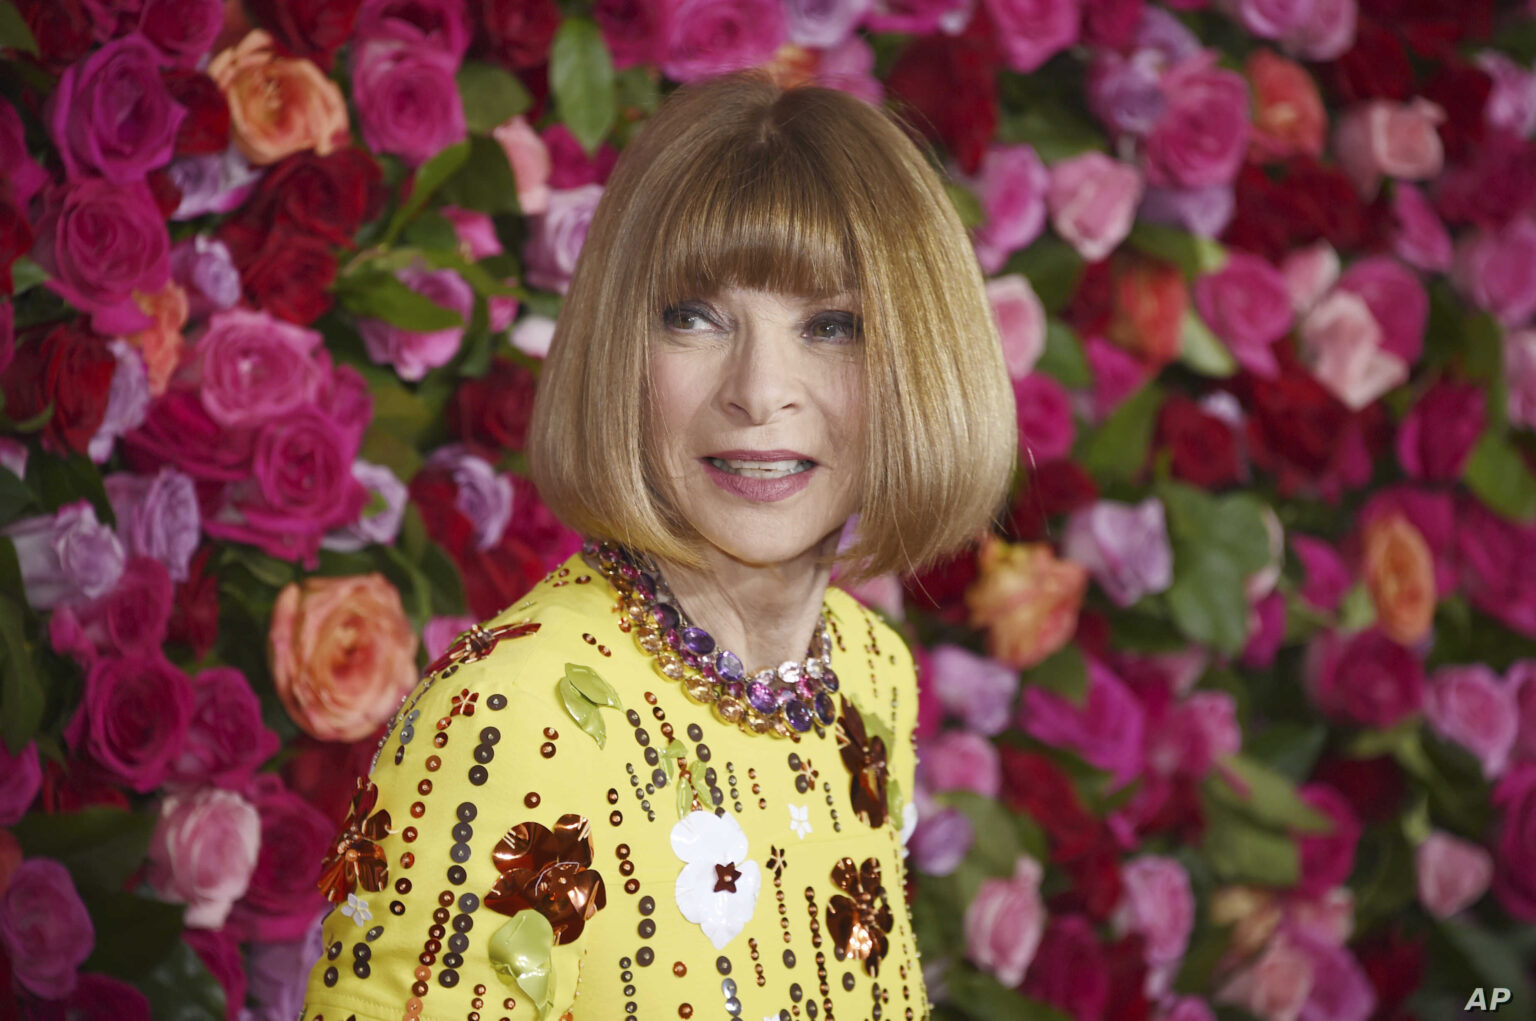 Anna Wintour on the demand for luxury after Covid-19 lockdowns